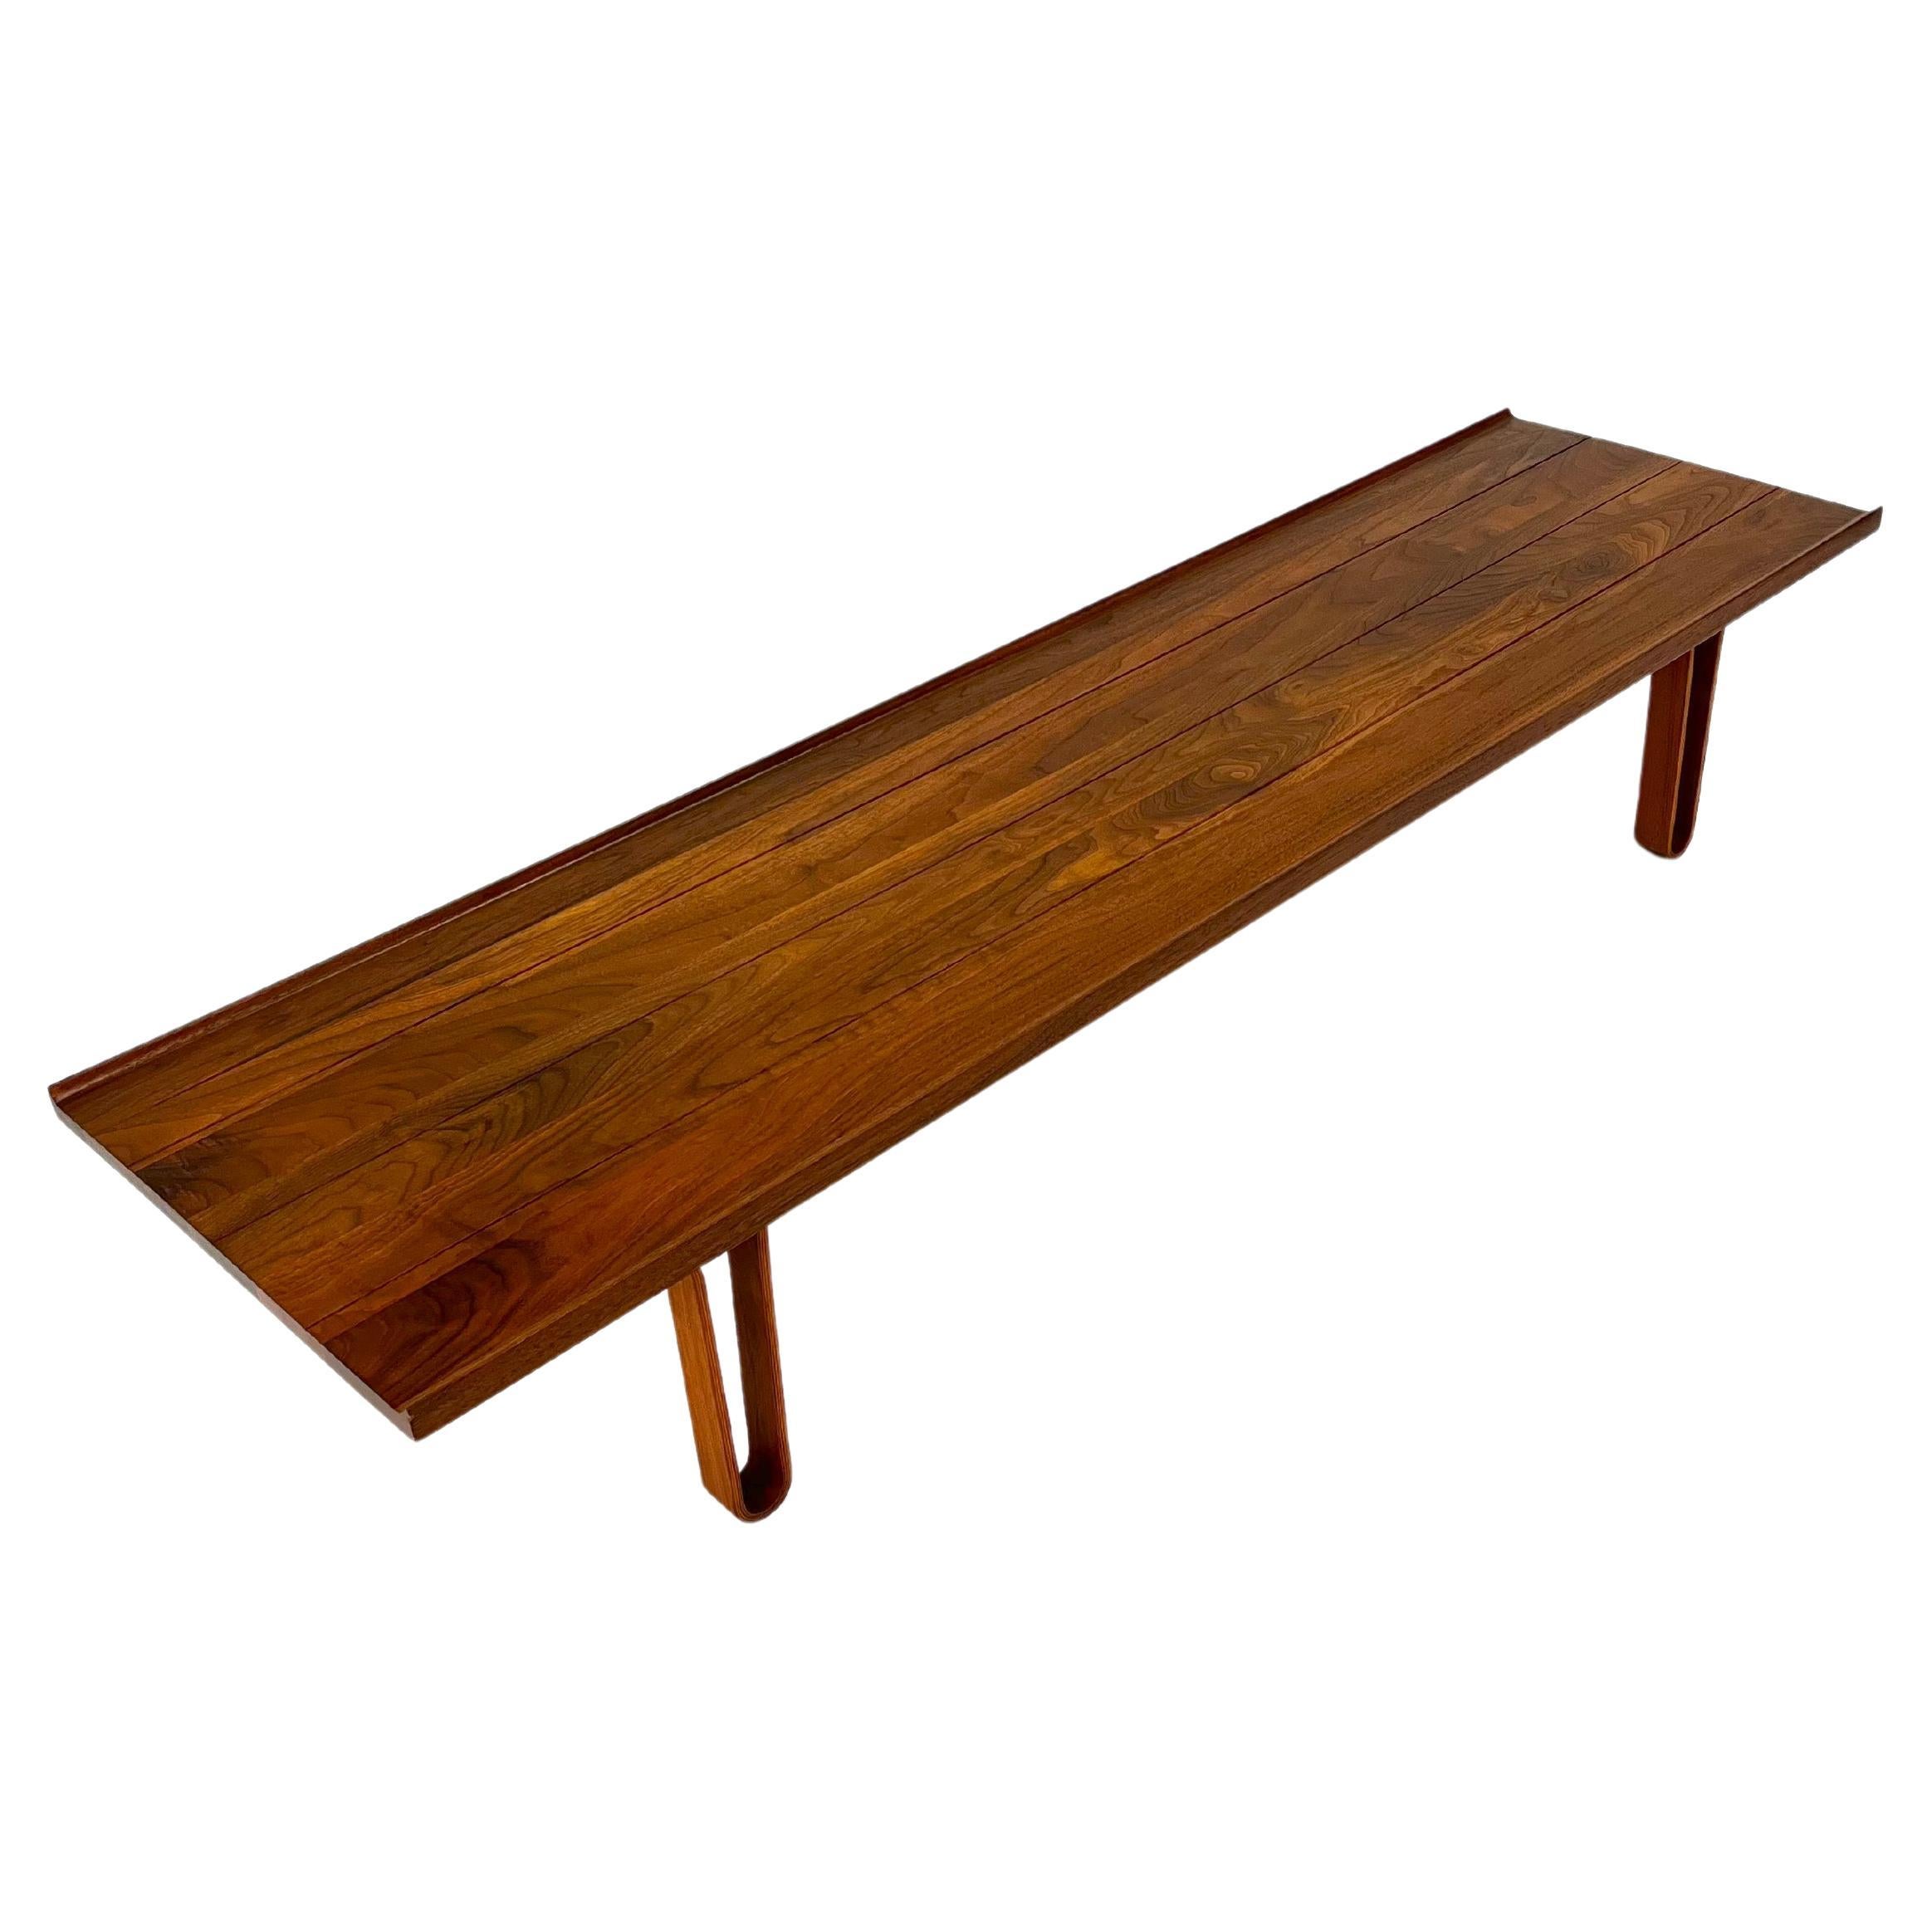 The iconic Long John bench designed by Edward Wormley for Dunbar. Features a solid walnut construction with bent hairpin plywood legs. The edge of the table has a slight raised edge. The table has been professionally refinished and is in excellent